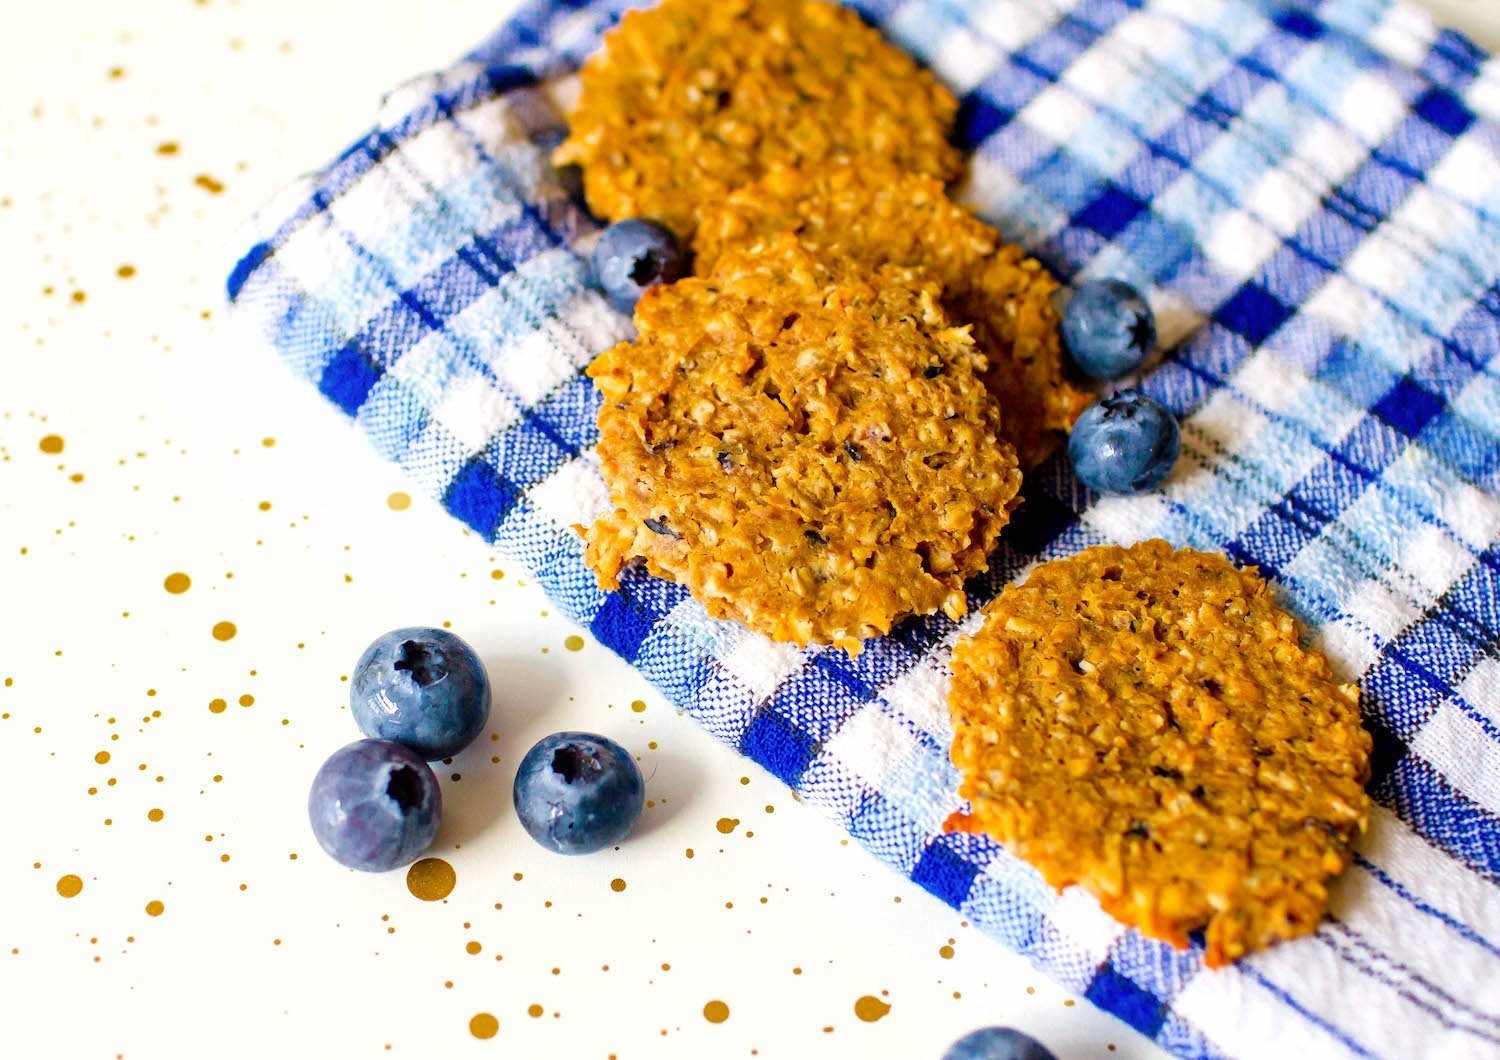 RECIPE for Blueberry and Peanut Butter Dog Treats